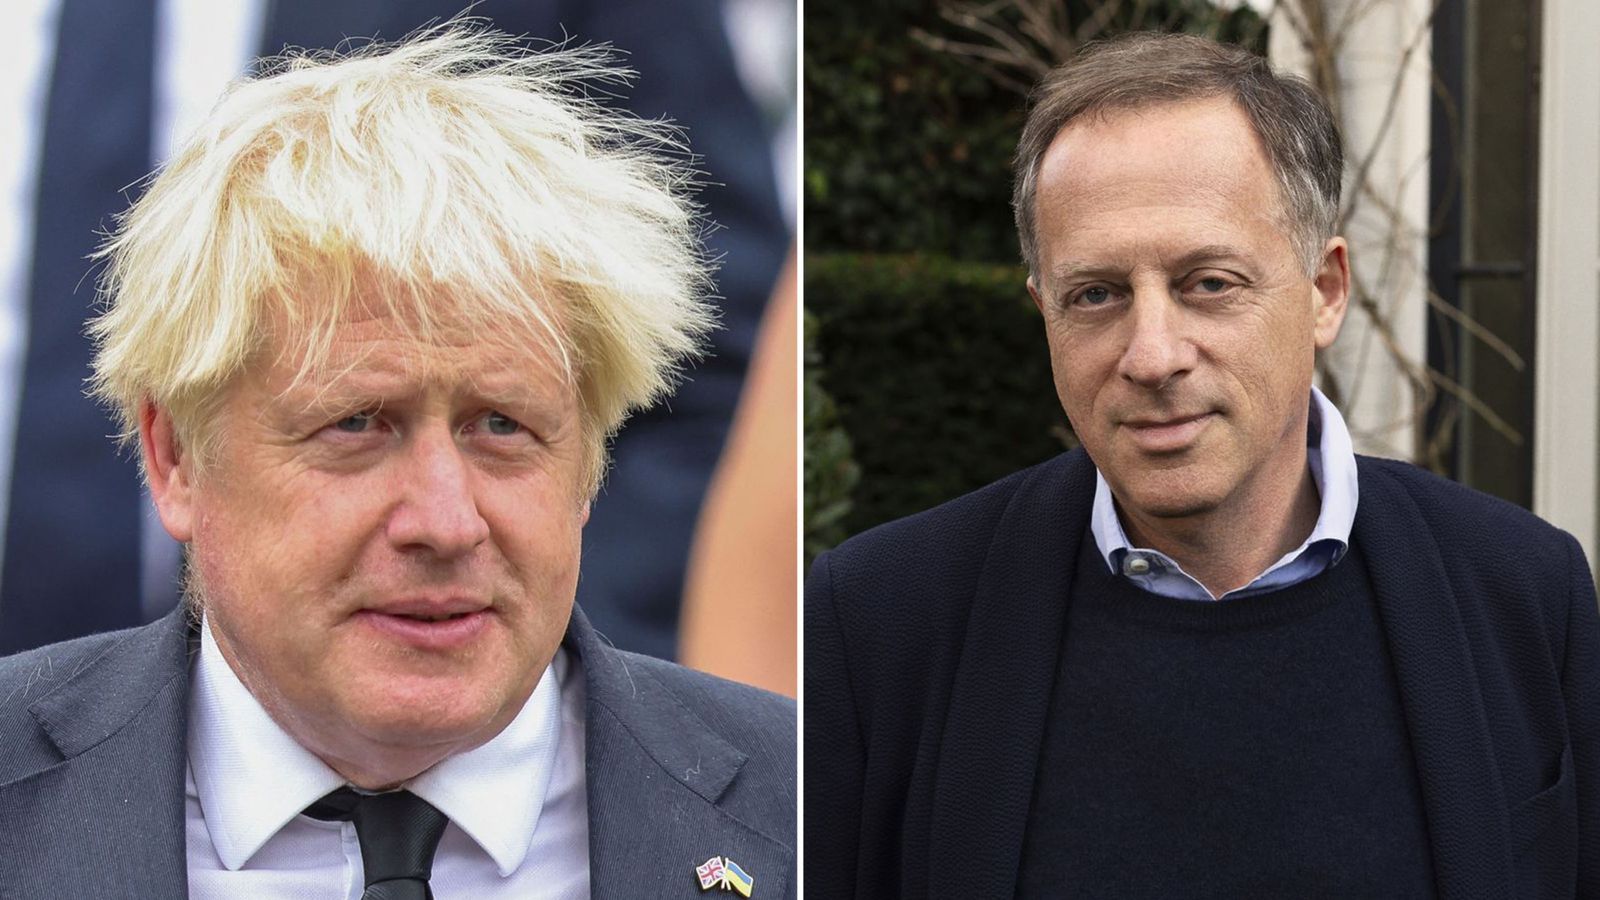 Boris Johnson told to stop asking Richard Sharp for financial advice days before he was made BBC chair – reports | Politics News